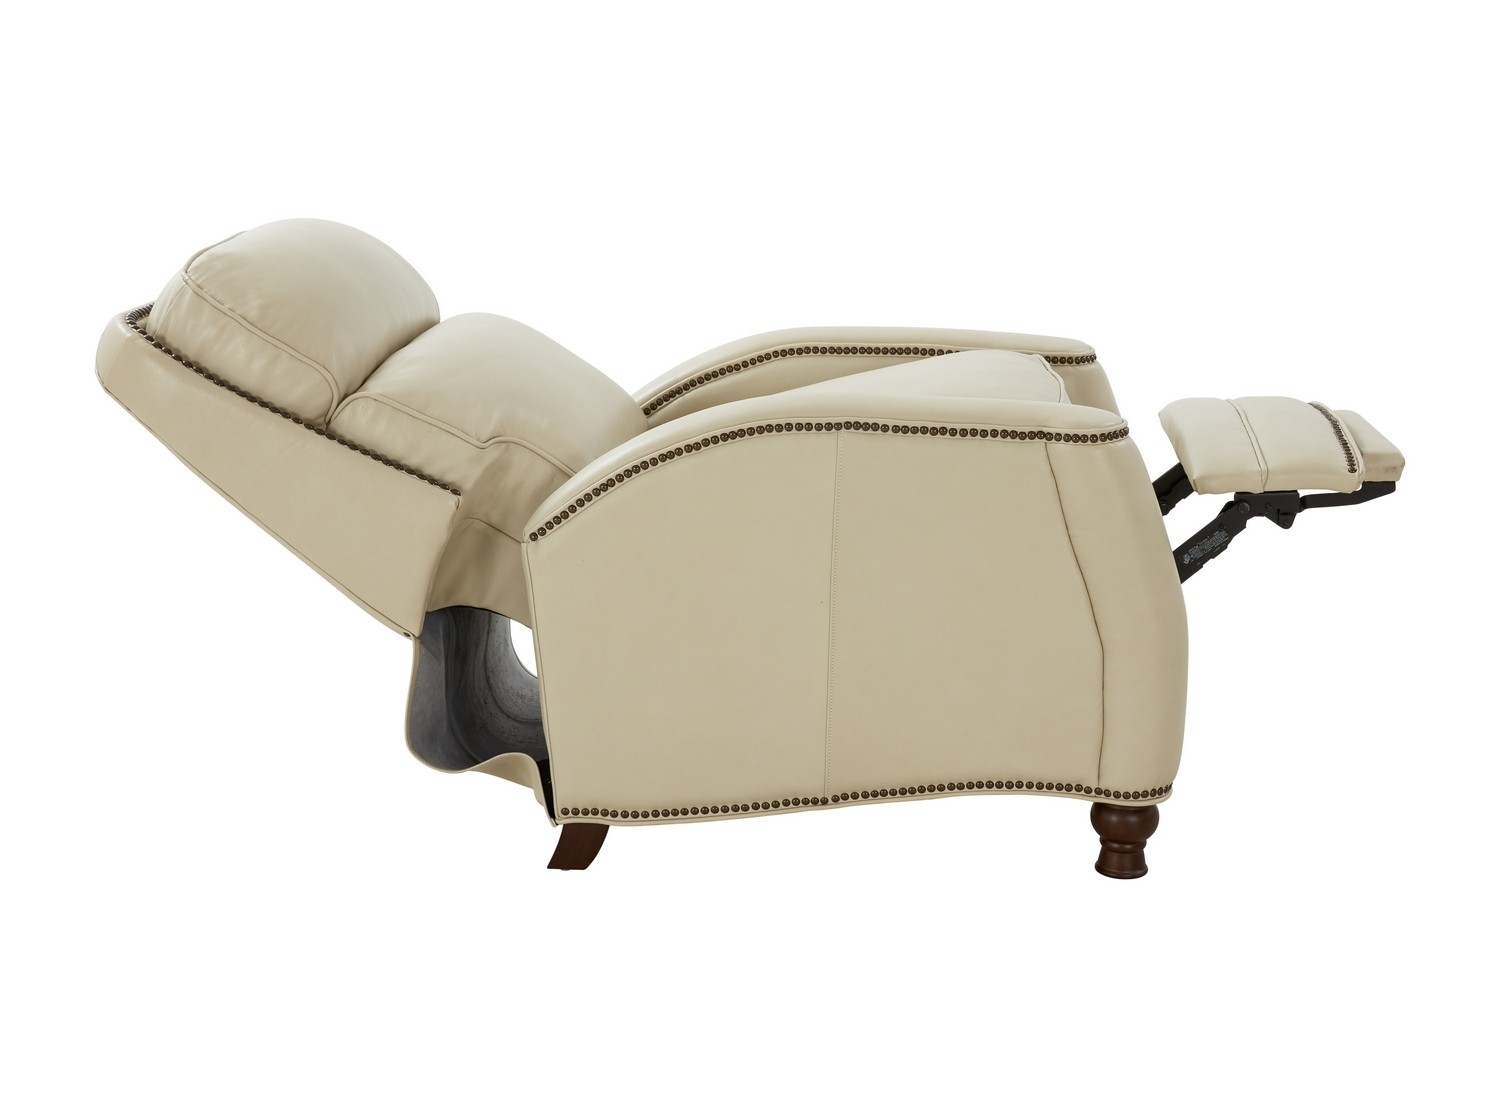 Barcalounger Townsend Recliner Chair - Barone Parchment/All Leather